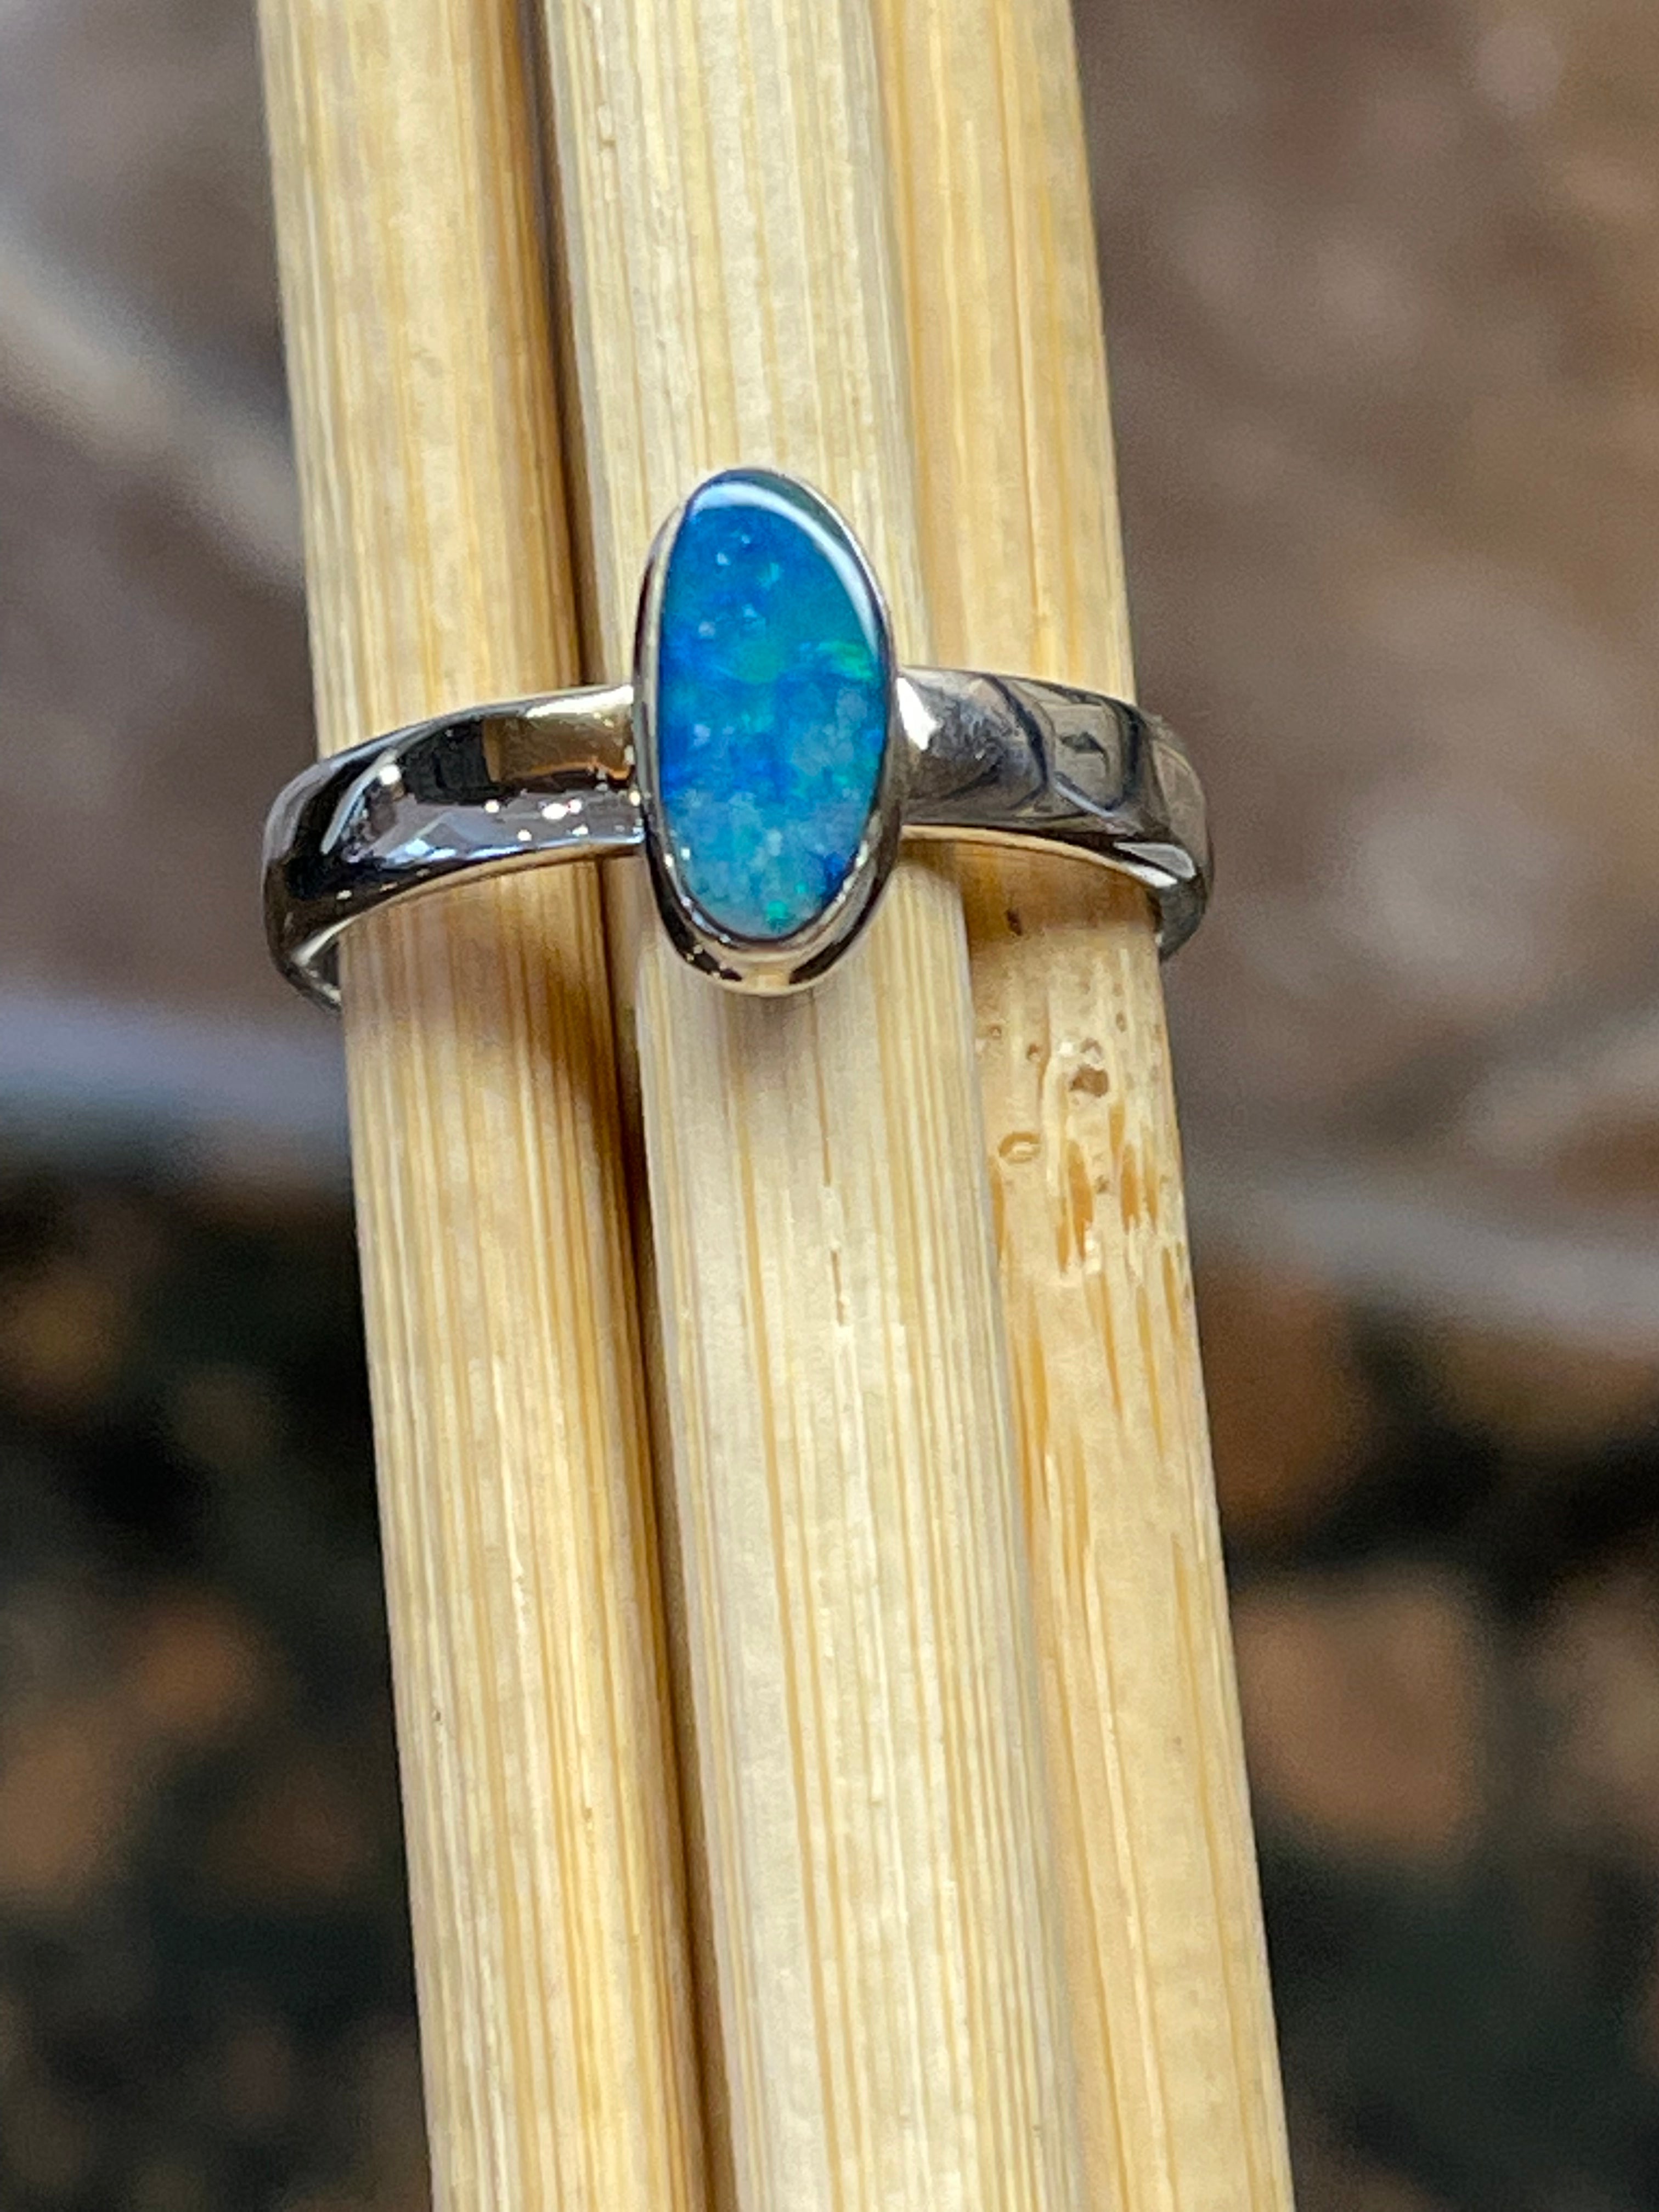 Genuine Australian Blue, Pink Opal 925 Solid Sterling Silver Engagement Ring Size 5.75 - Natural Rocks by Kala